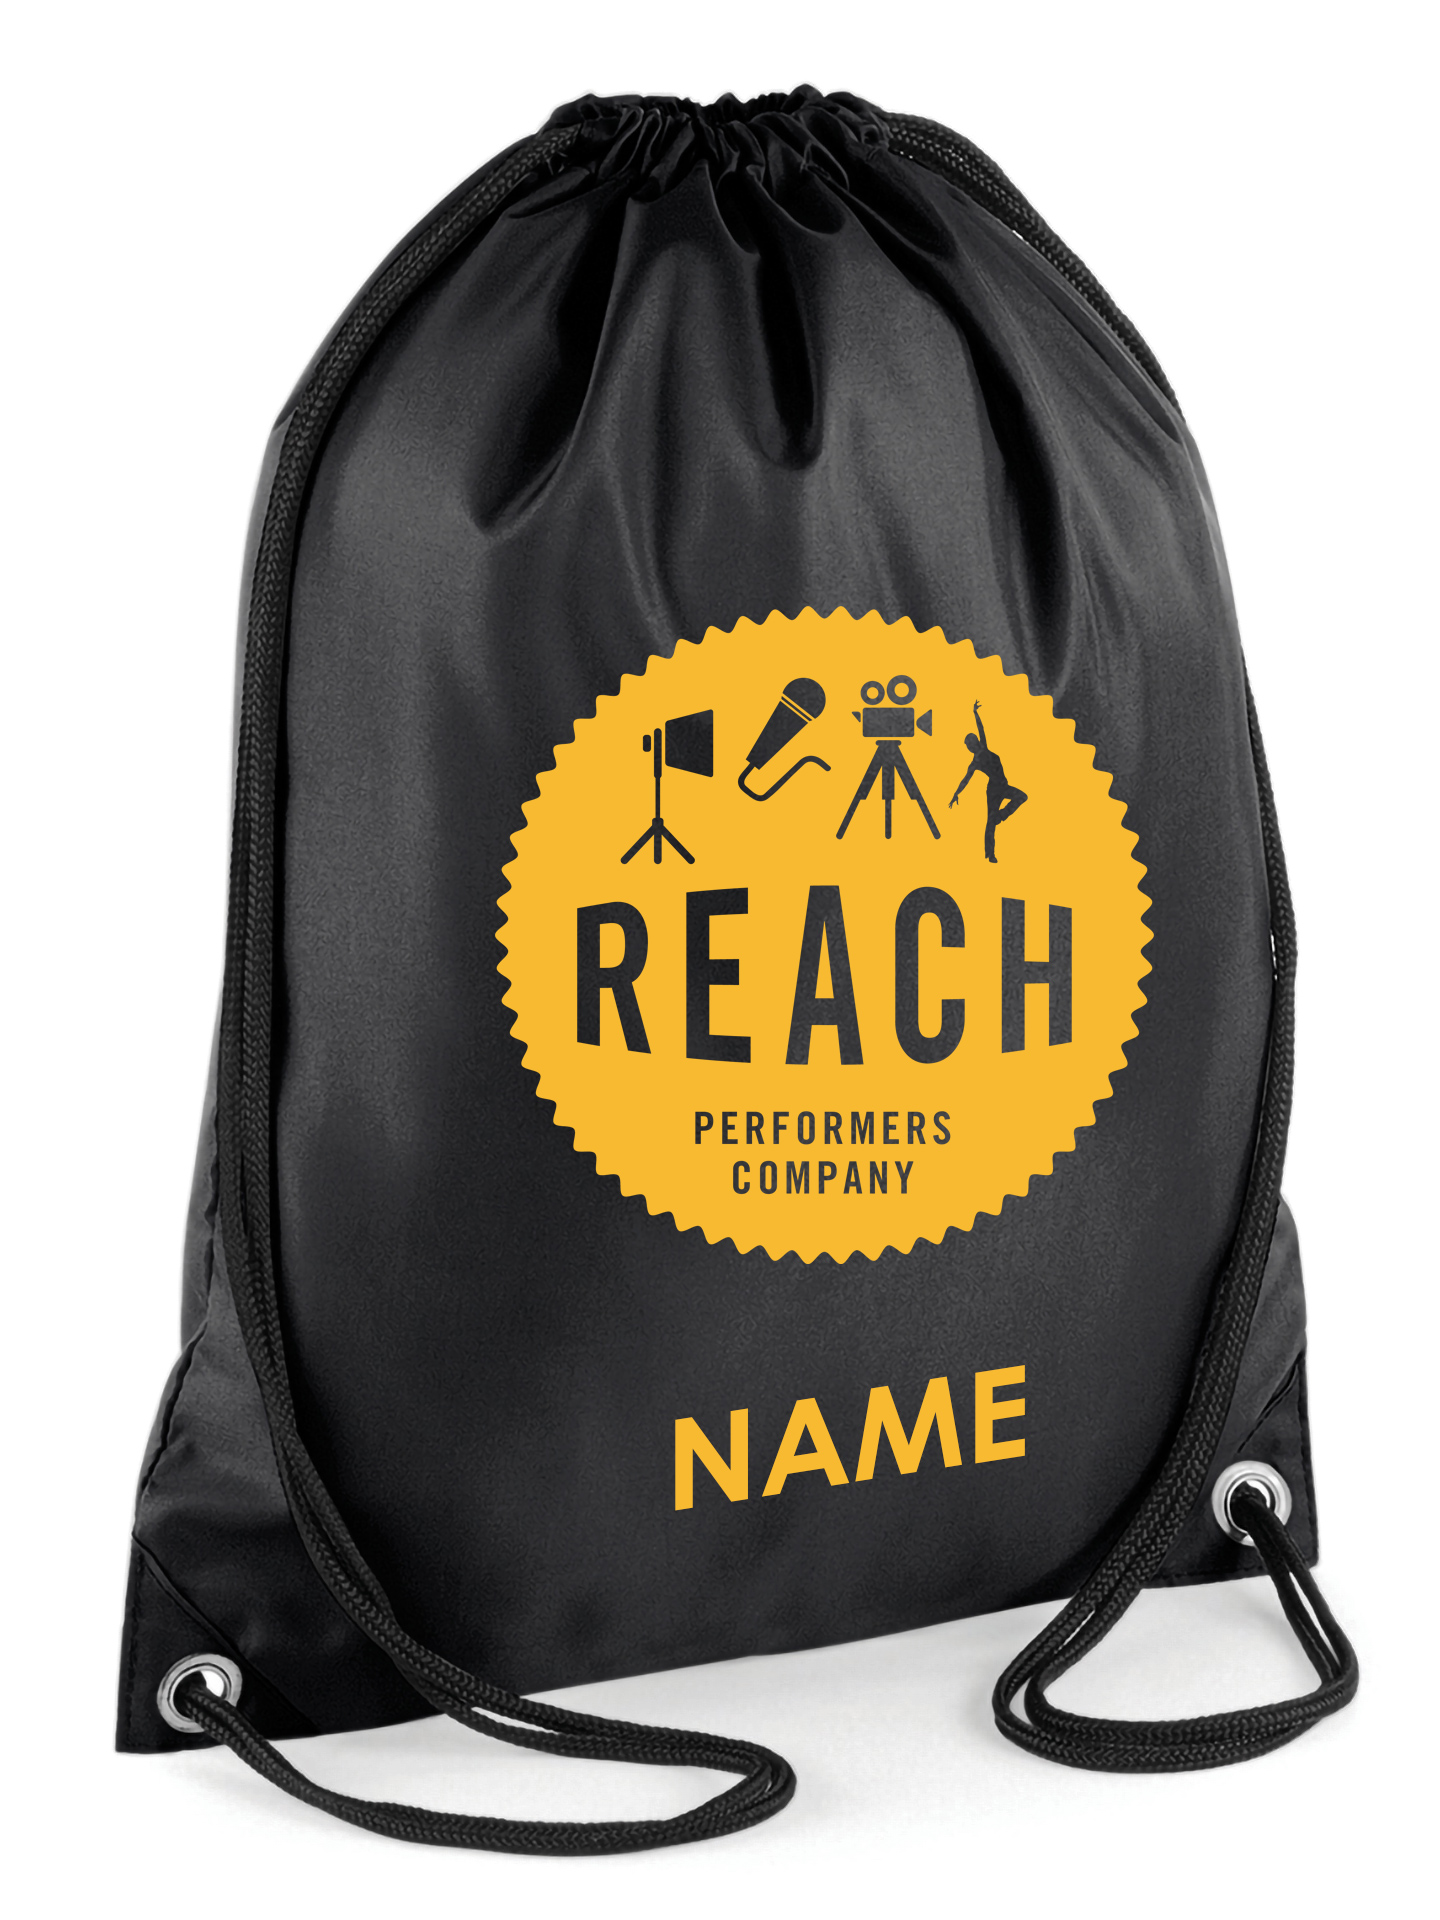 The Reach Performers Company Gym Sack | Rock the Dragon